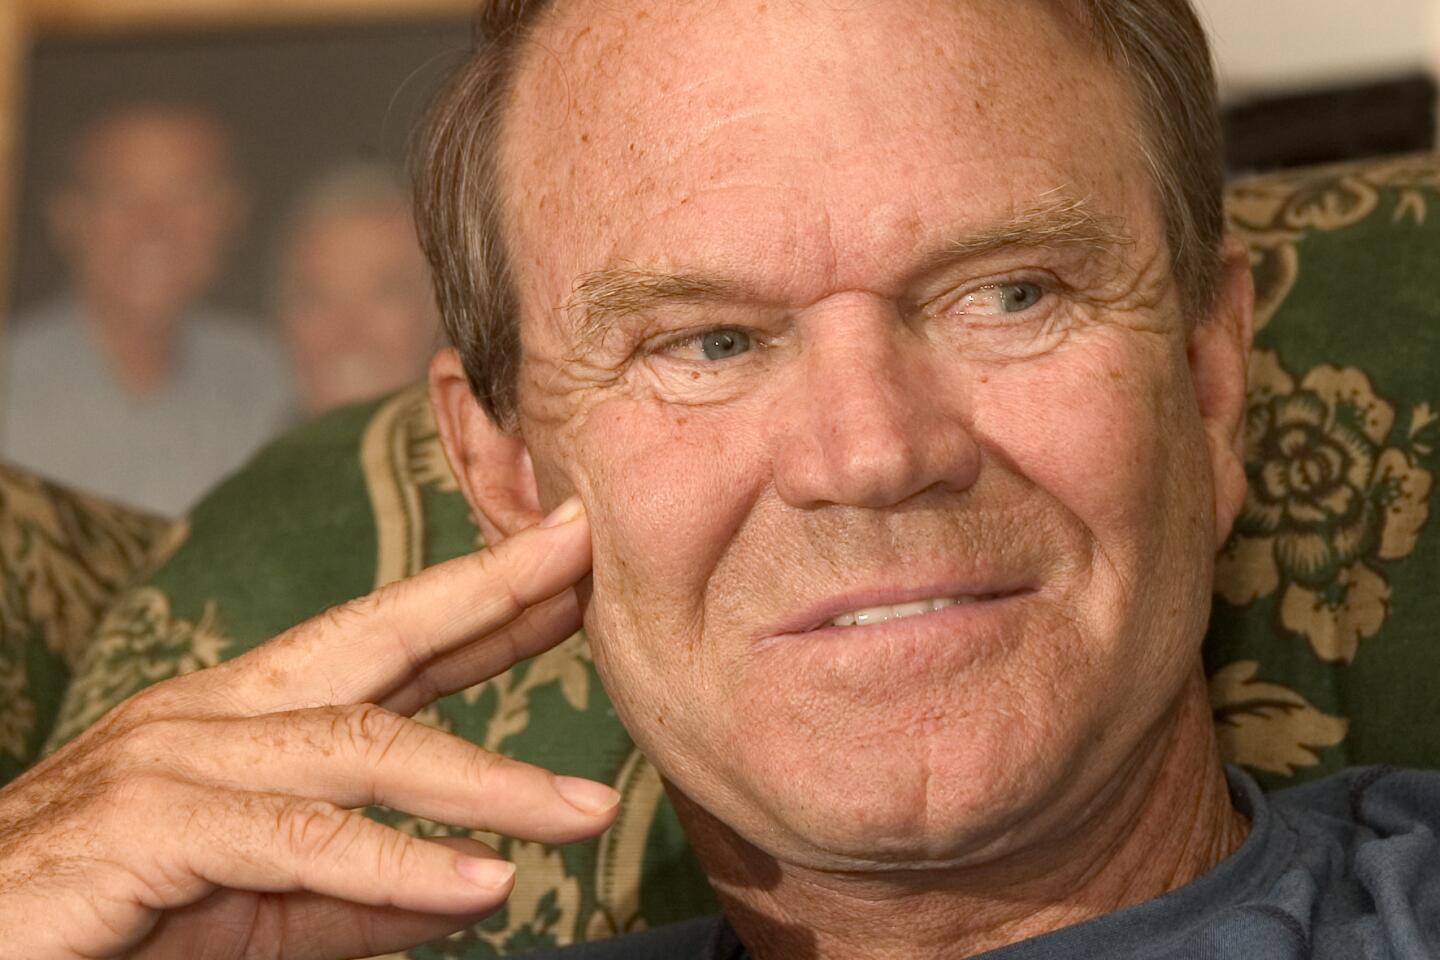 Glen Campbell: Life in pictures